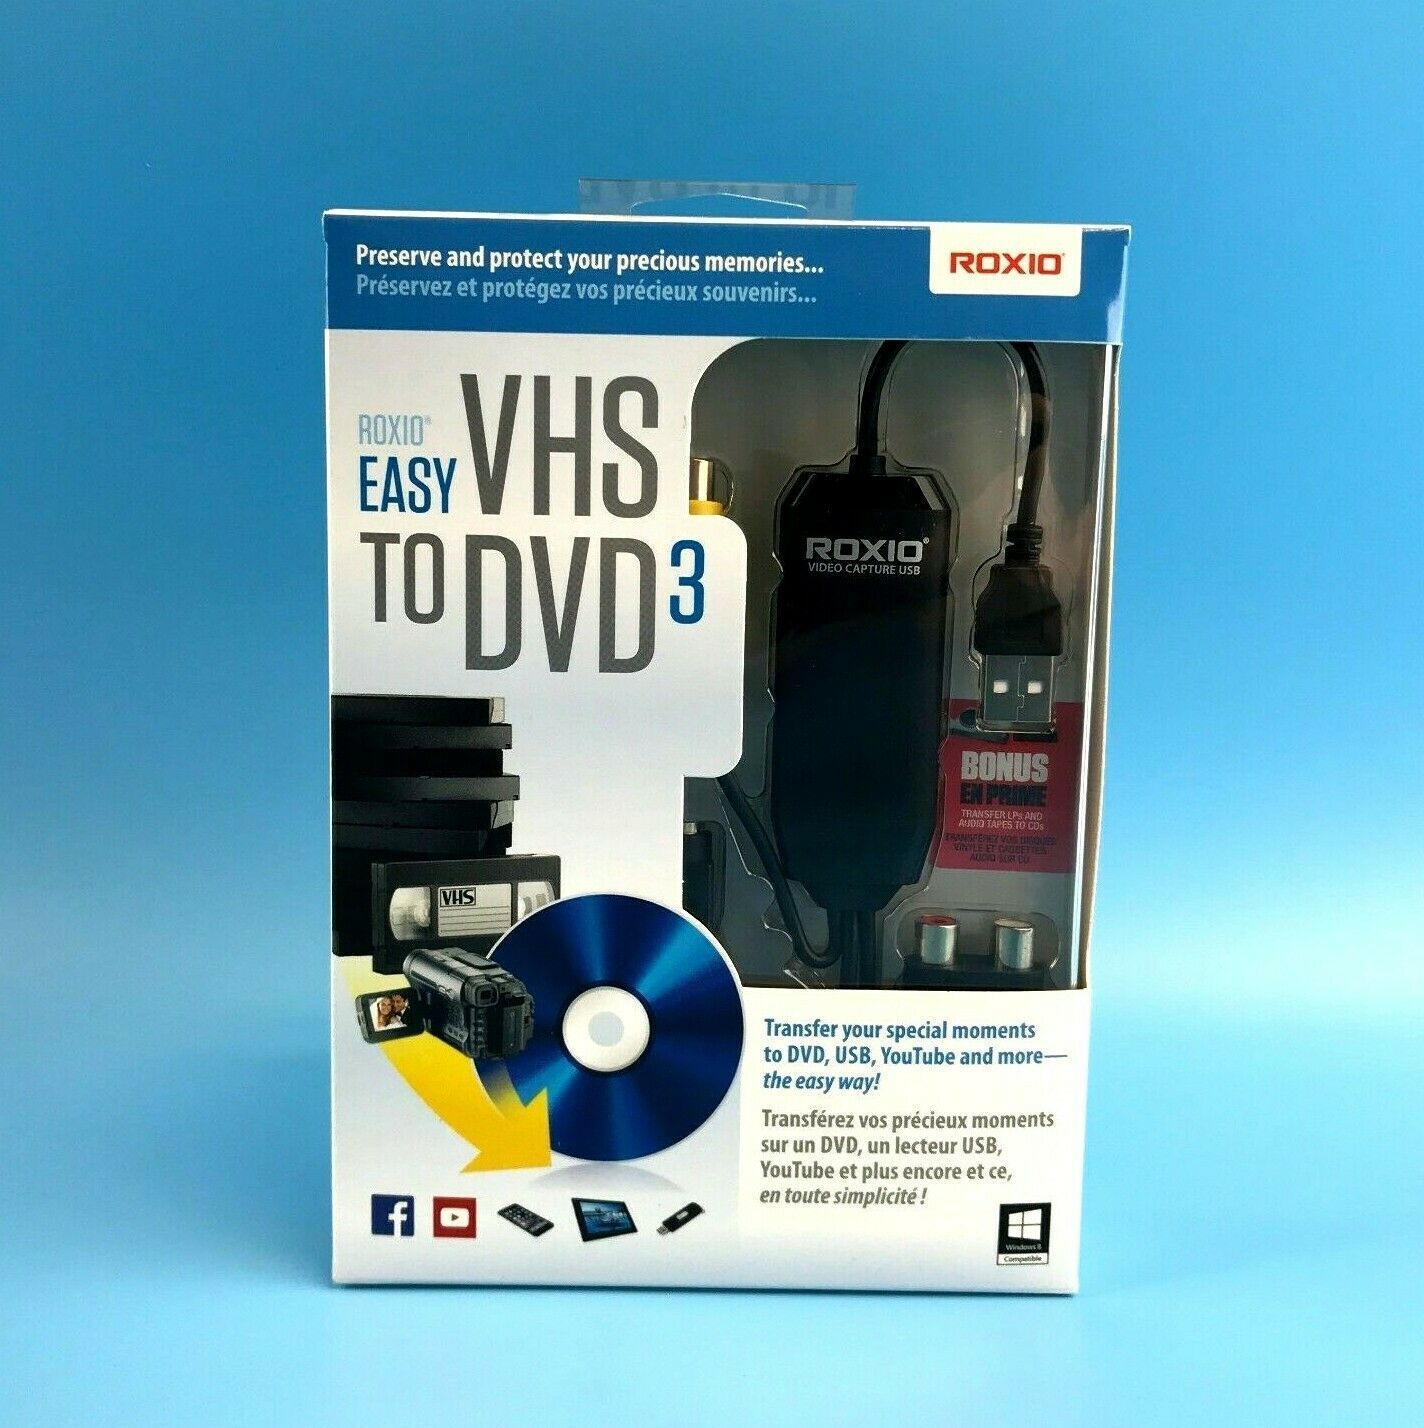 roxio easy vhs to dvd support